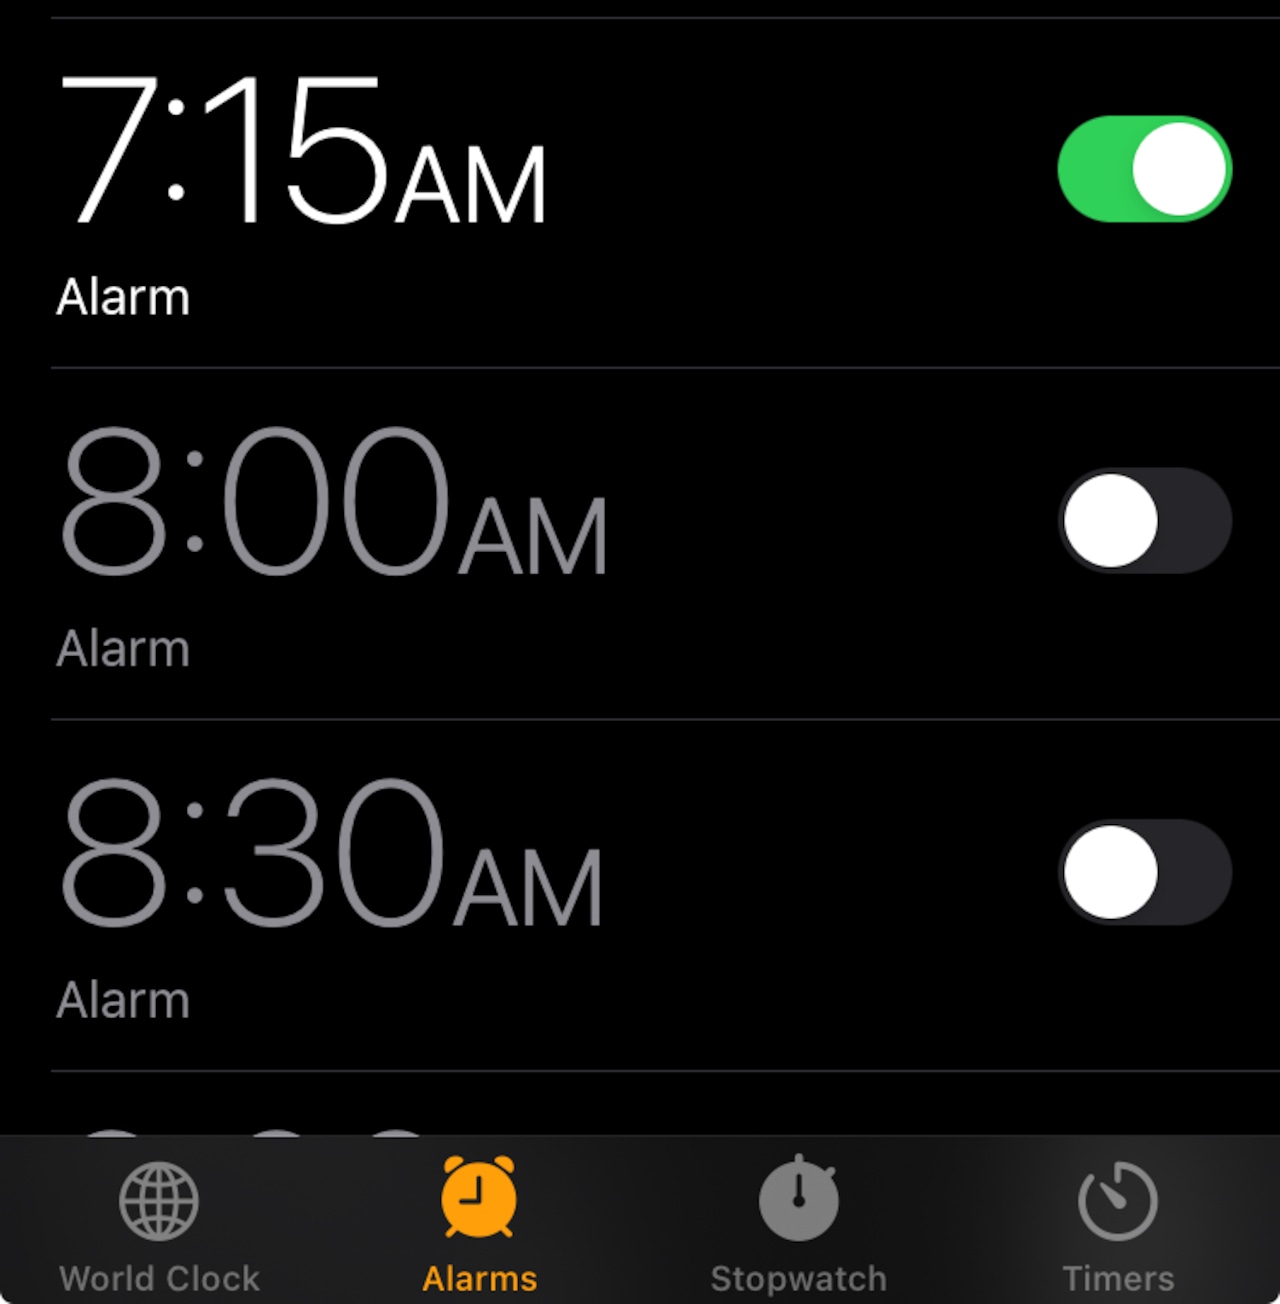 Apple acknowledges iPhone alarm problems. Here are some possible fixes [Video]